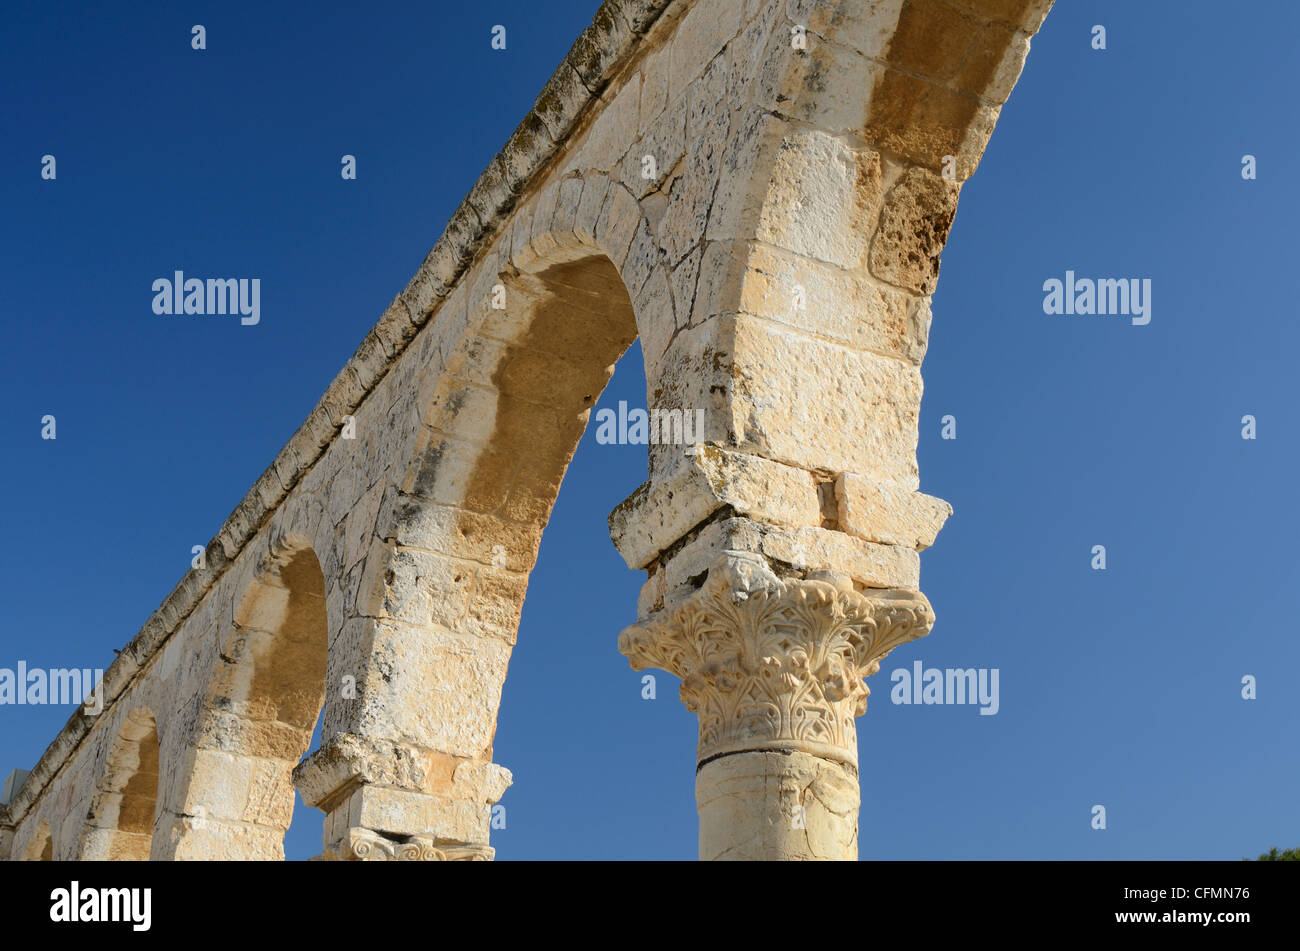 Arches on the temple mount in Jerusalem Stock Photo